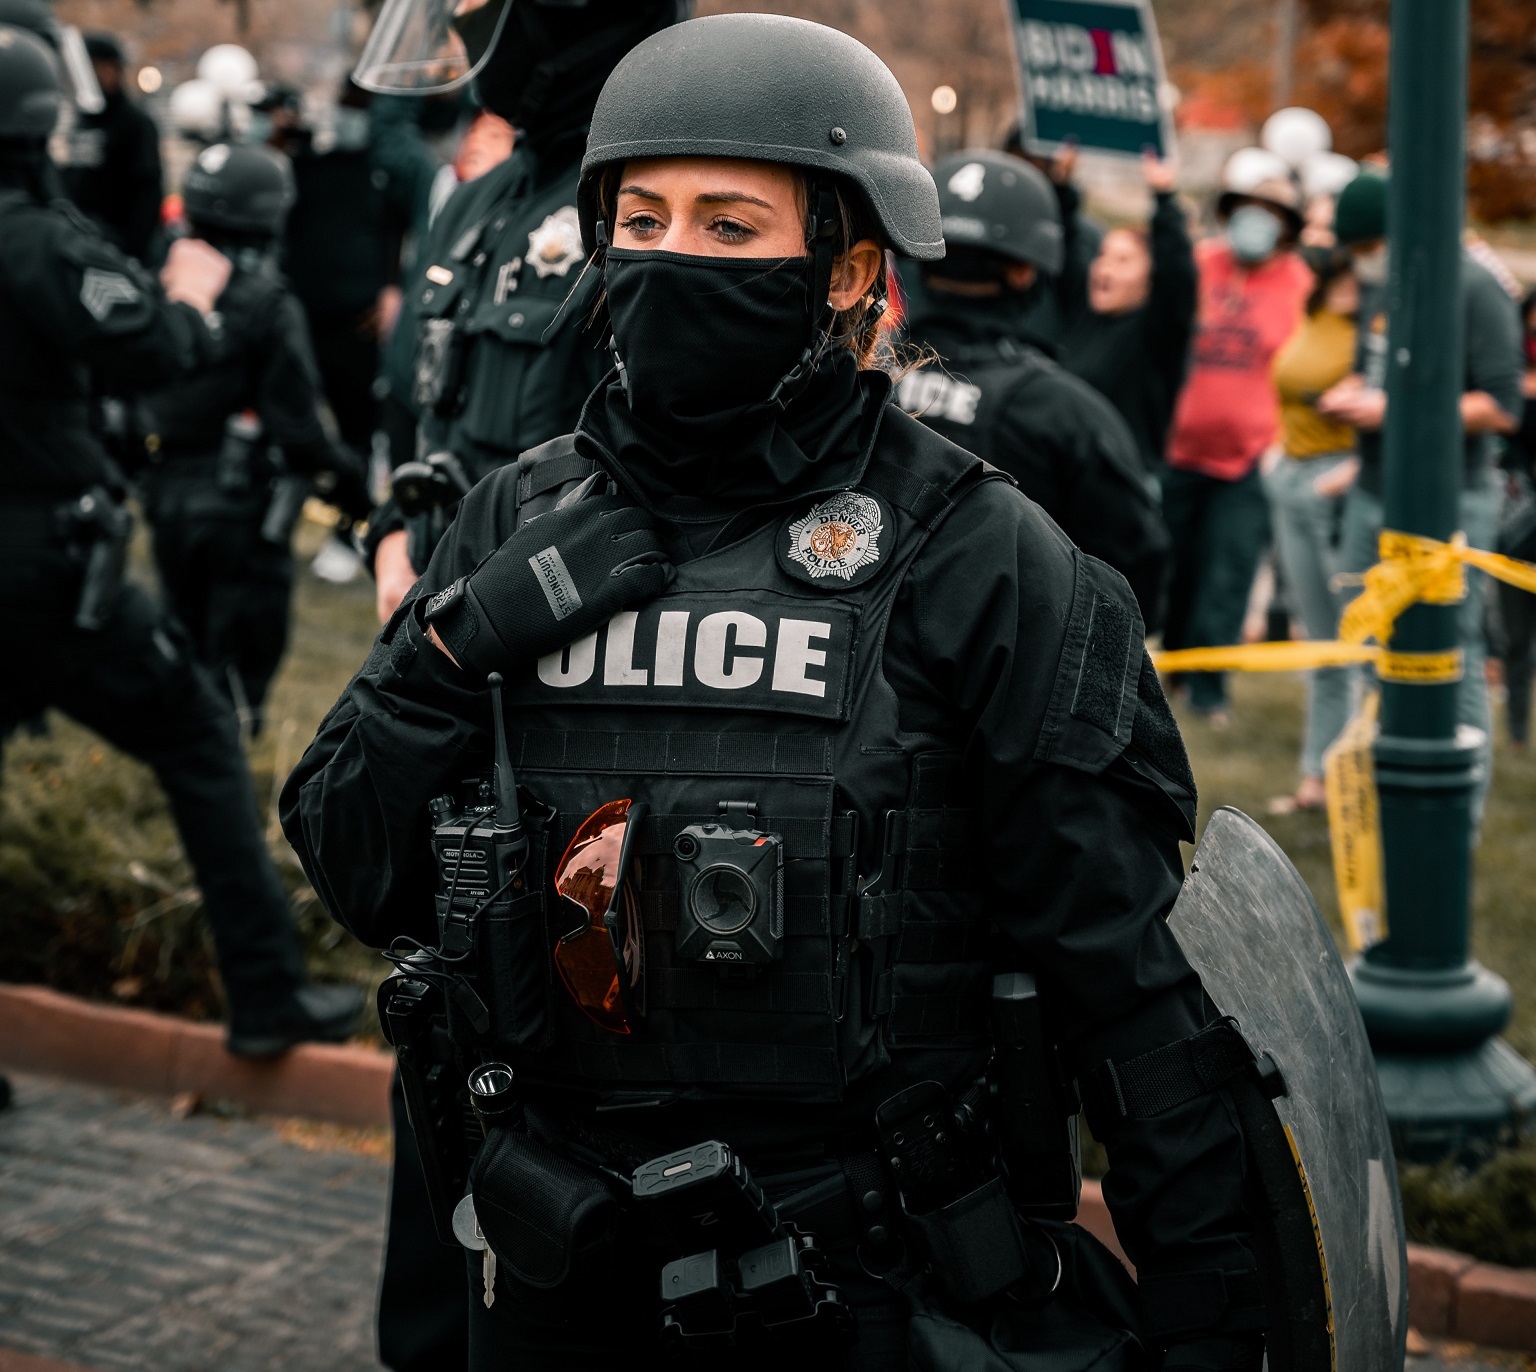 Gear up and Stay Protected: Top Protection Products for Law Enforcement